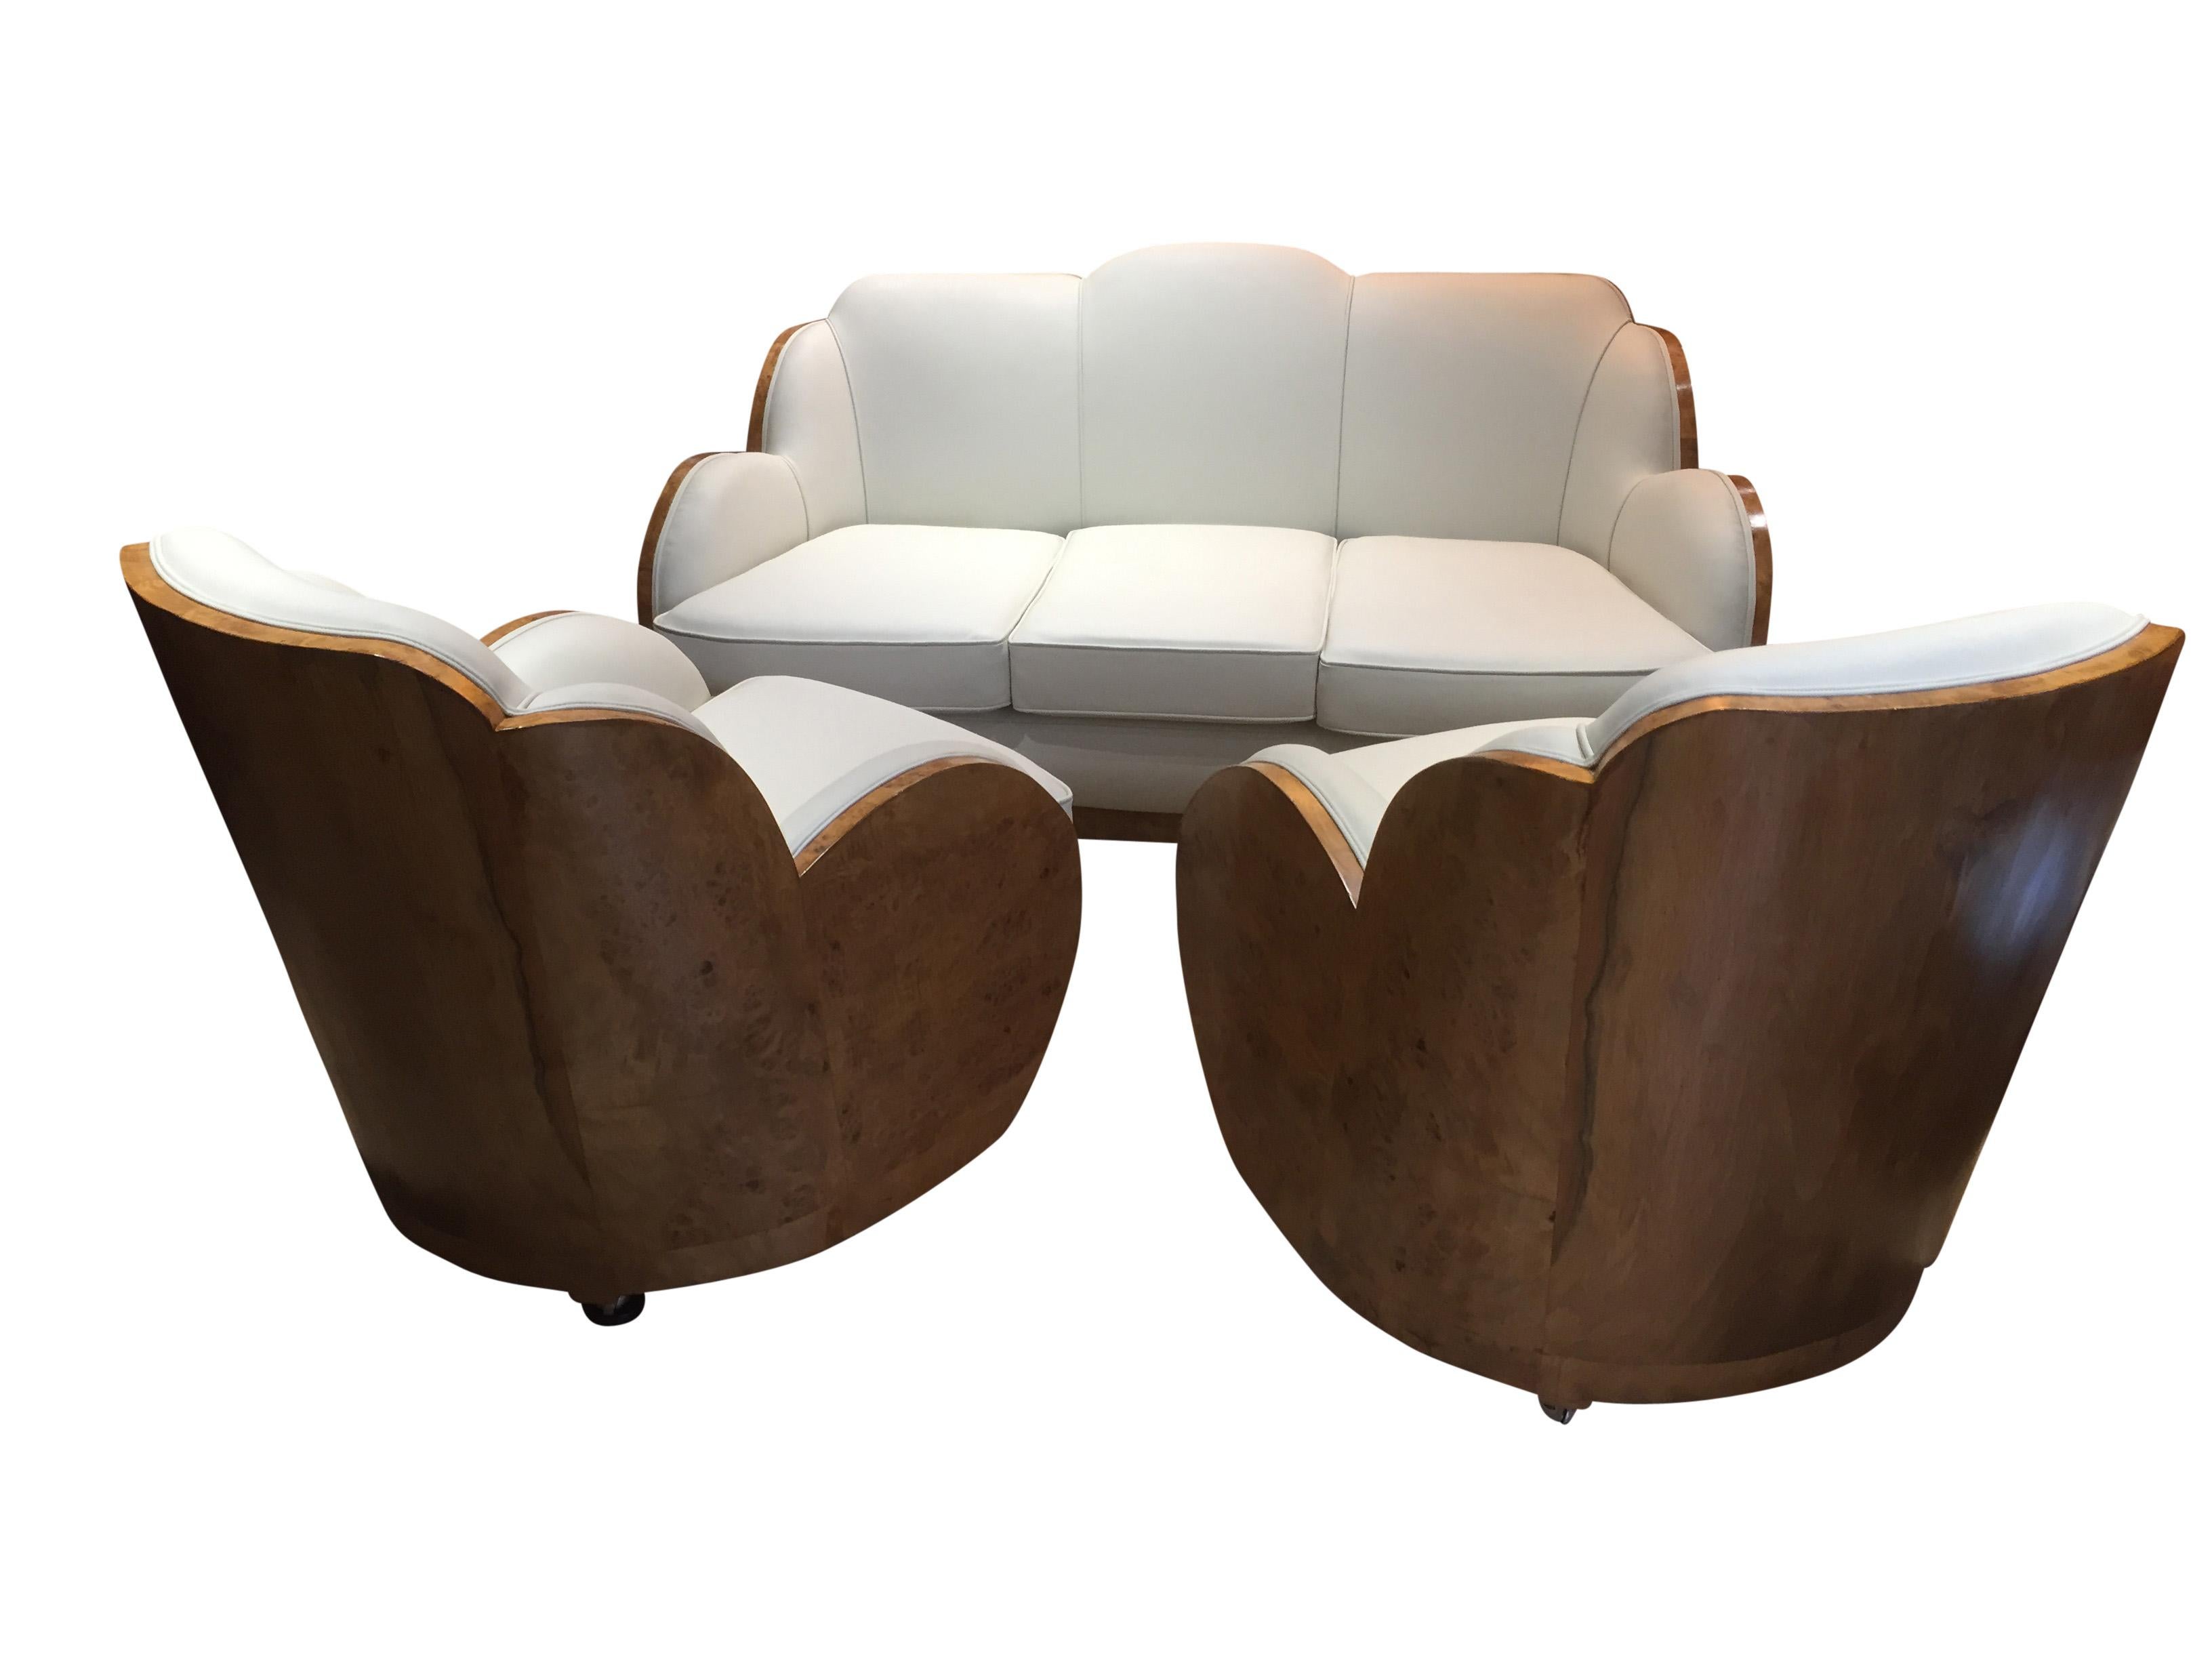 A top of the range Art Deco 3-piece cloud suite by Harry and Lou Epstein. The suite has just been reupholstered in soft cream leather. Each piece has a matching and a particularly striking walnut veneered back, whilst the sides of the armchairs and